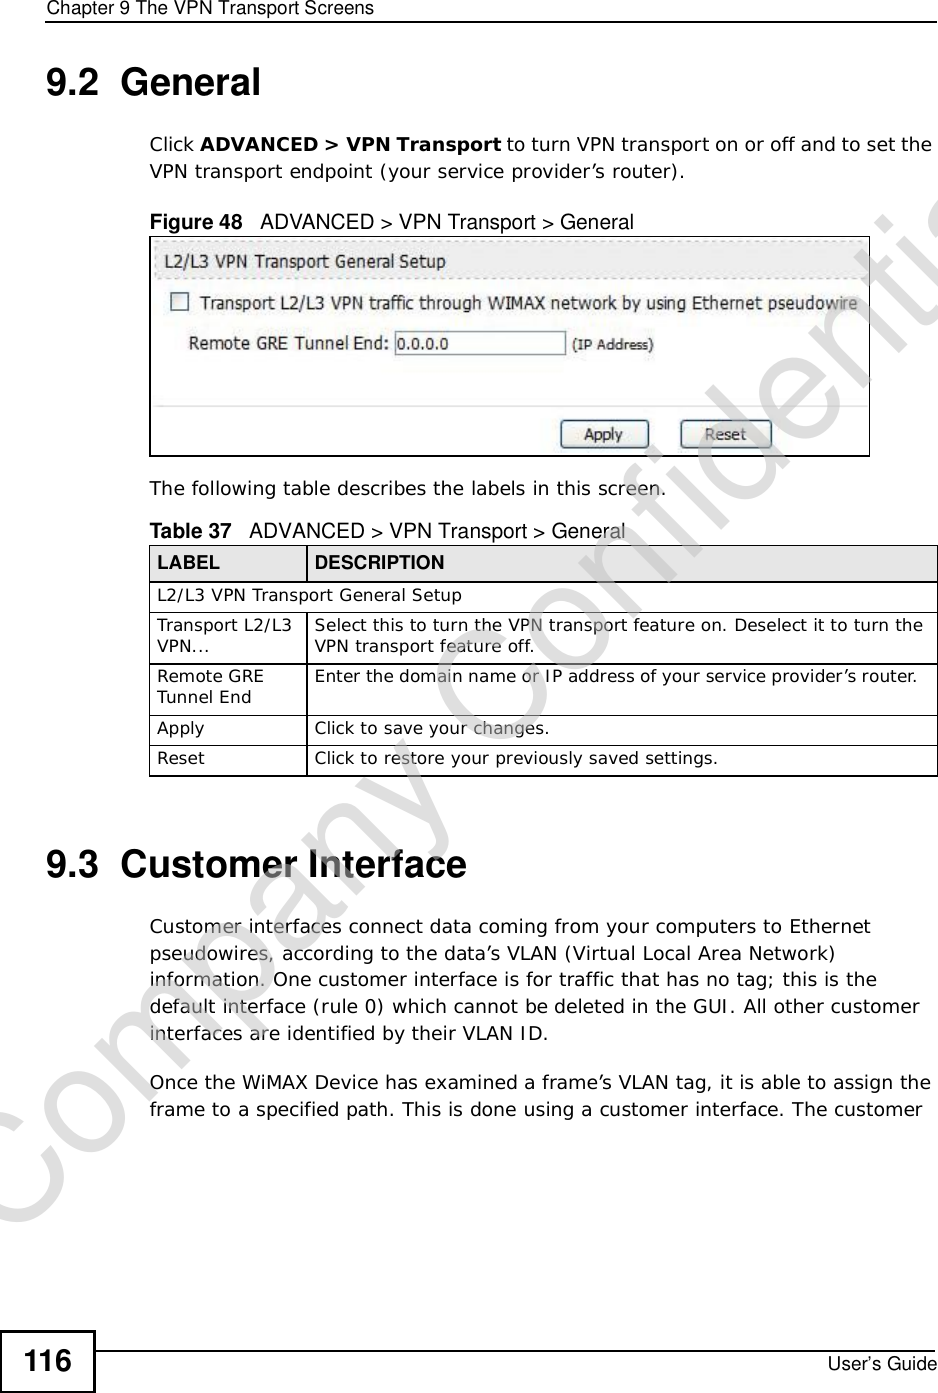 Chapter 9The VPN Transport ScreensUser’s Guide1169.2  GeneralClick ADVANCED &gt;VPN Transport to turn VPN transport on or off and to set the VPN transport endpoint (your service provider’s router).Figure 48   ADVANCED &gt; VPN Transport &gt; GeneralThe following table describes the labels in this screen.9.3  Customer InterfaceCustomer interfaces connect data coming from your computers to Ethernet pseudowires, according to the data’s VLAN (Virtual Local Area Network) information. One customer interface is for traffic that has no tag; this is the default interface (rule 0) which cannot be deleted in the GUI. All other customer interfaces are identified by their VLAN ID.Once the WiMAX Device has examined a frame’s VLAN tag, it is able to assign the frame to a specified path. This is done using a customer interface. The customer Table 37   ADVANCED &gt; VPN Transport &gt; GeneralLABEL DESCRIPTIONL2/L3 VPN Transport General SetupTransport L2/L3 VPN... Select this to turn the VPN transport feature on. Deselect it to turn the VPN transport feature off.Remote GRE Tunnel End Enter the domain name or IP address of your service provider’s router.  ApplyClick to save your changes.ResetClick to restore your previously saved settings.Company Confidential